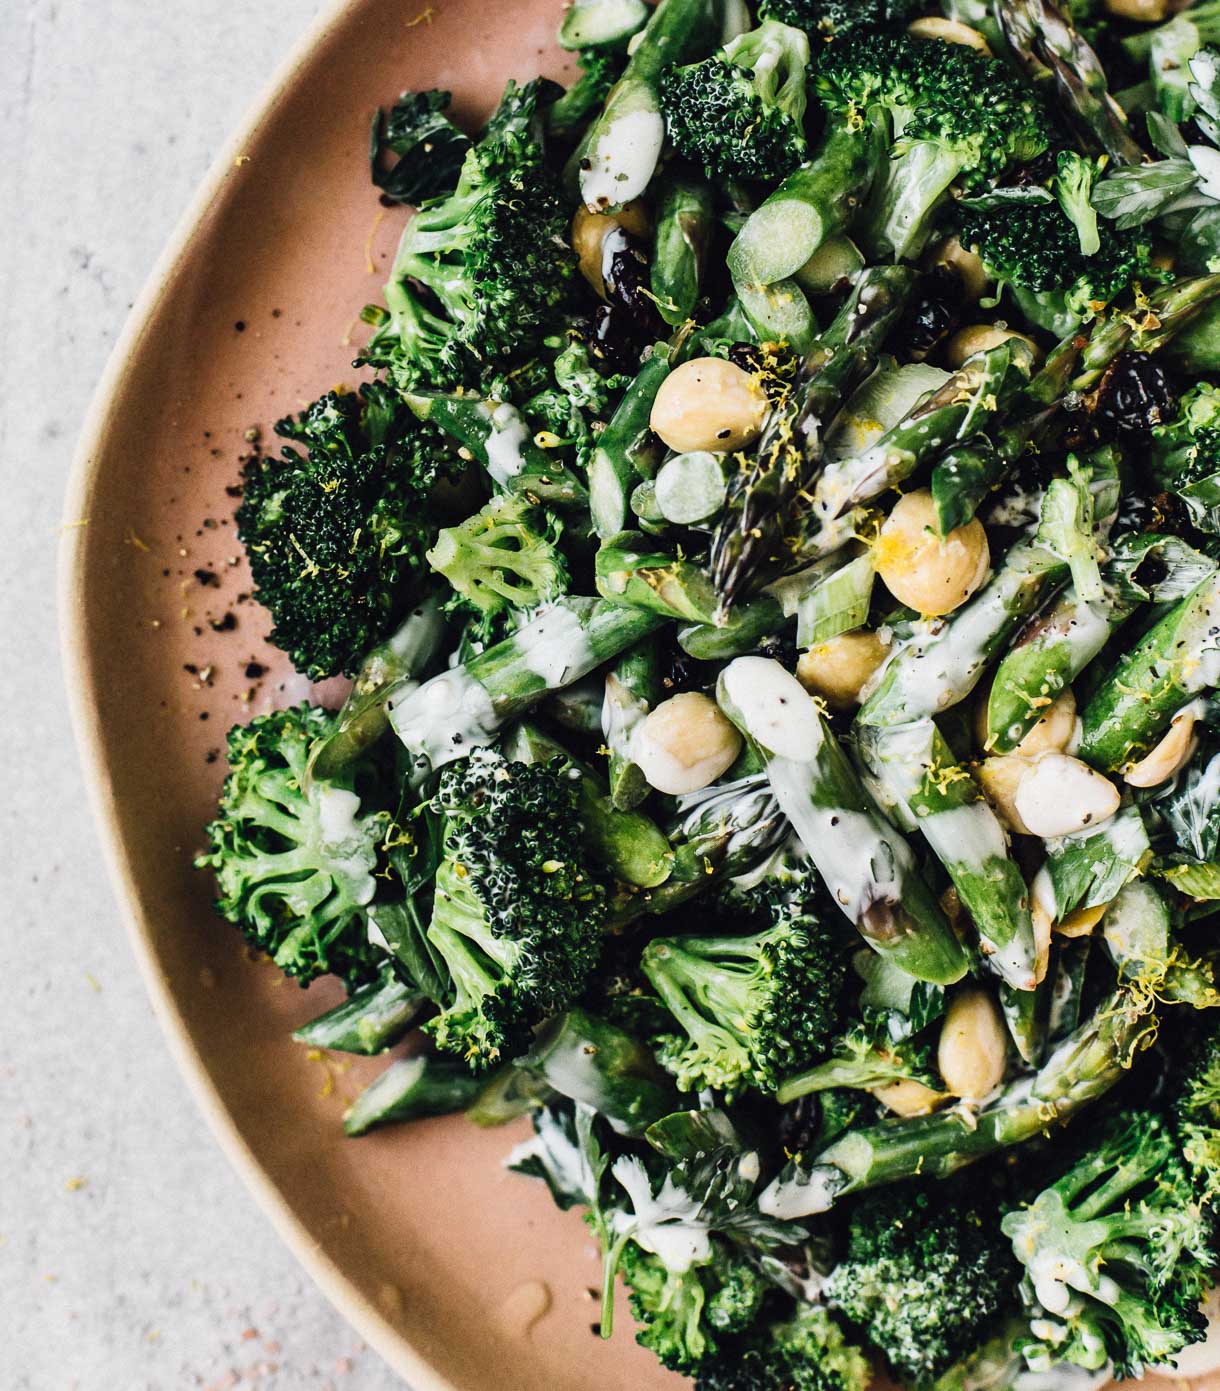 Plate of Broccoli Crunch Salad with Marcona Nut and Fruit Blend.